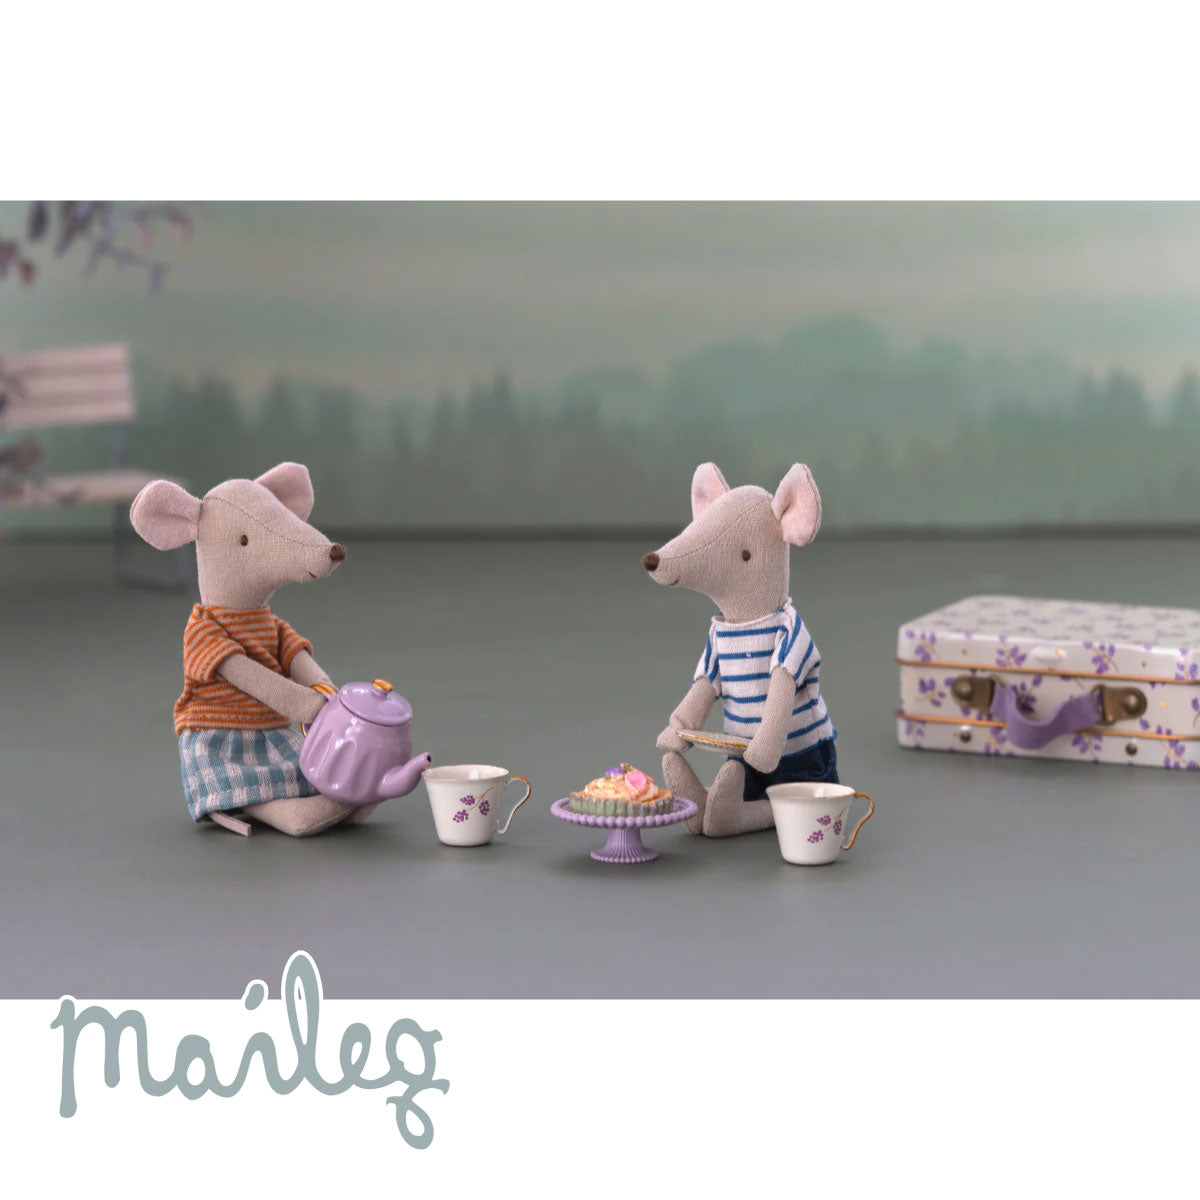 Maileg Mouse Afternoon Treat - Purple Madelaine